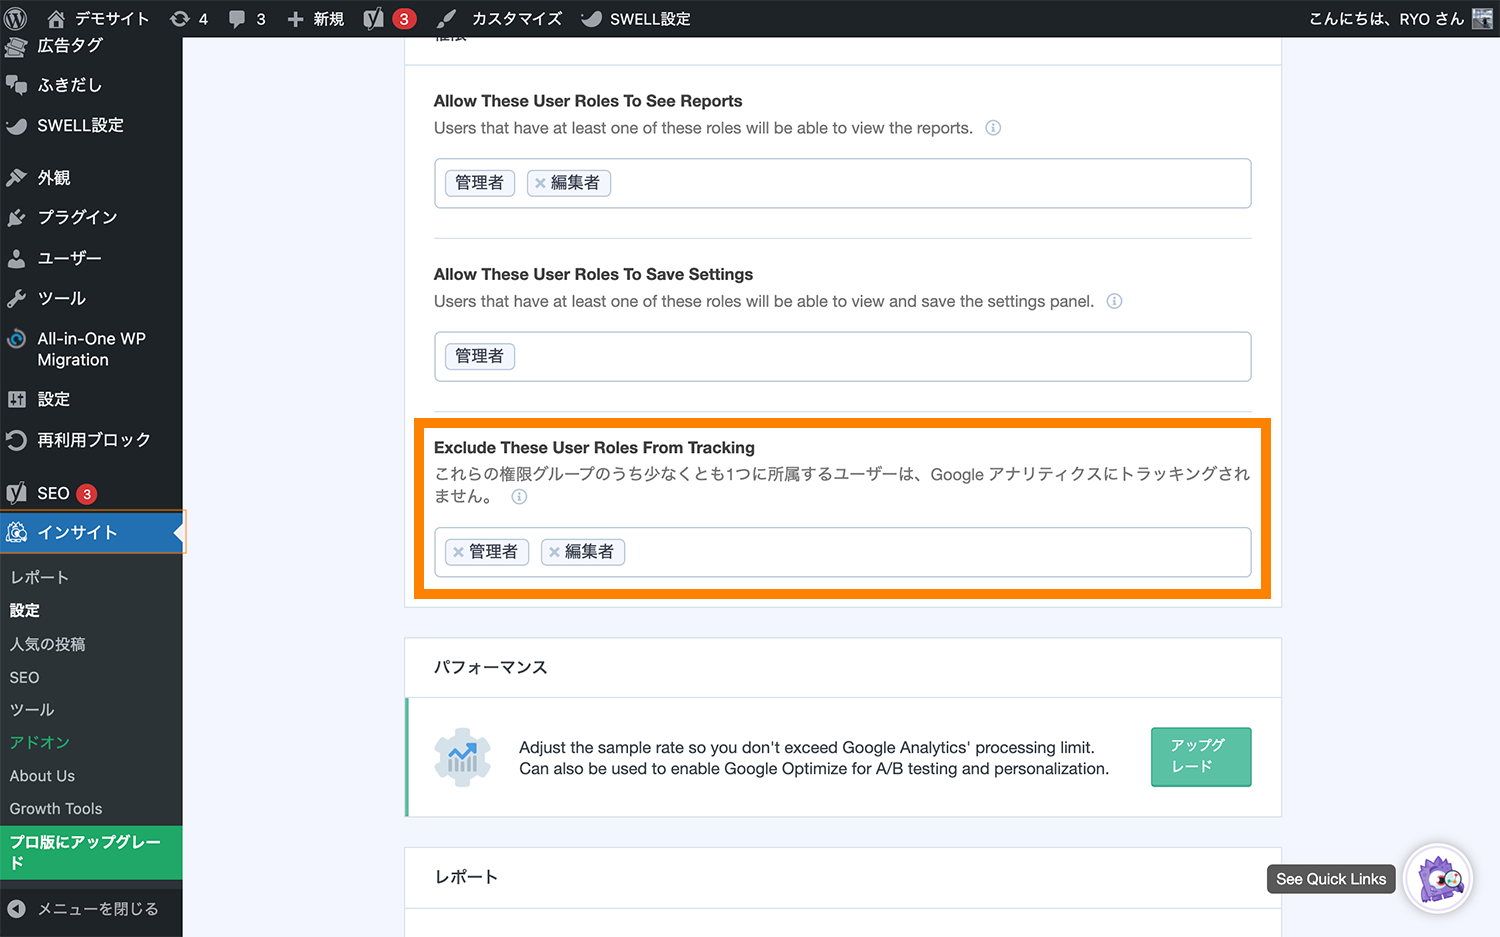 「Exclude These User Roles From Tracking」にアクセス除外したい権限グループを追加する。